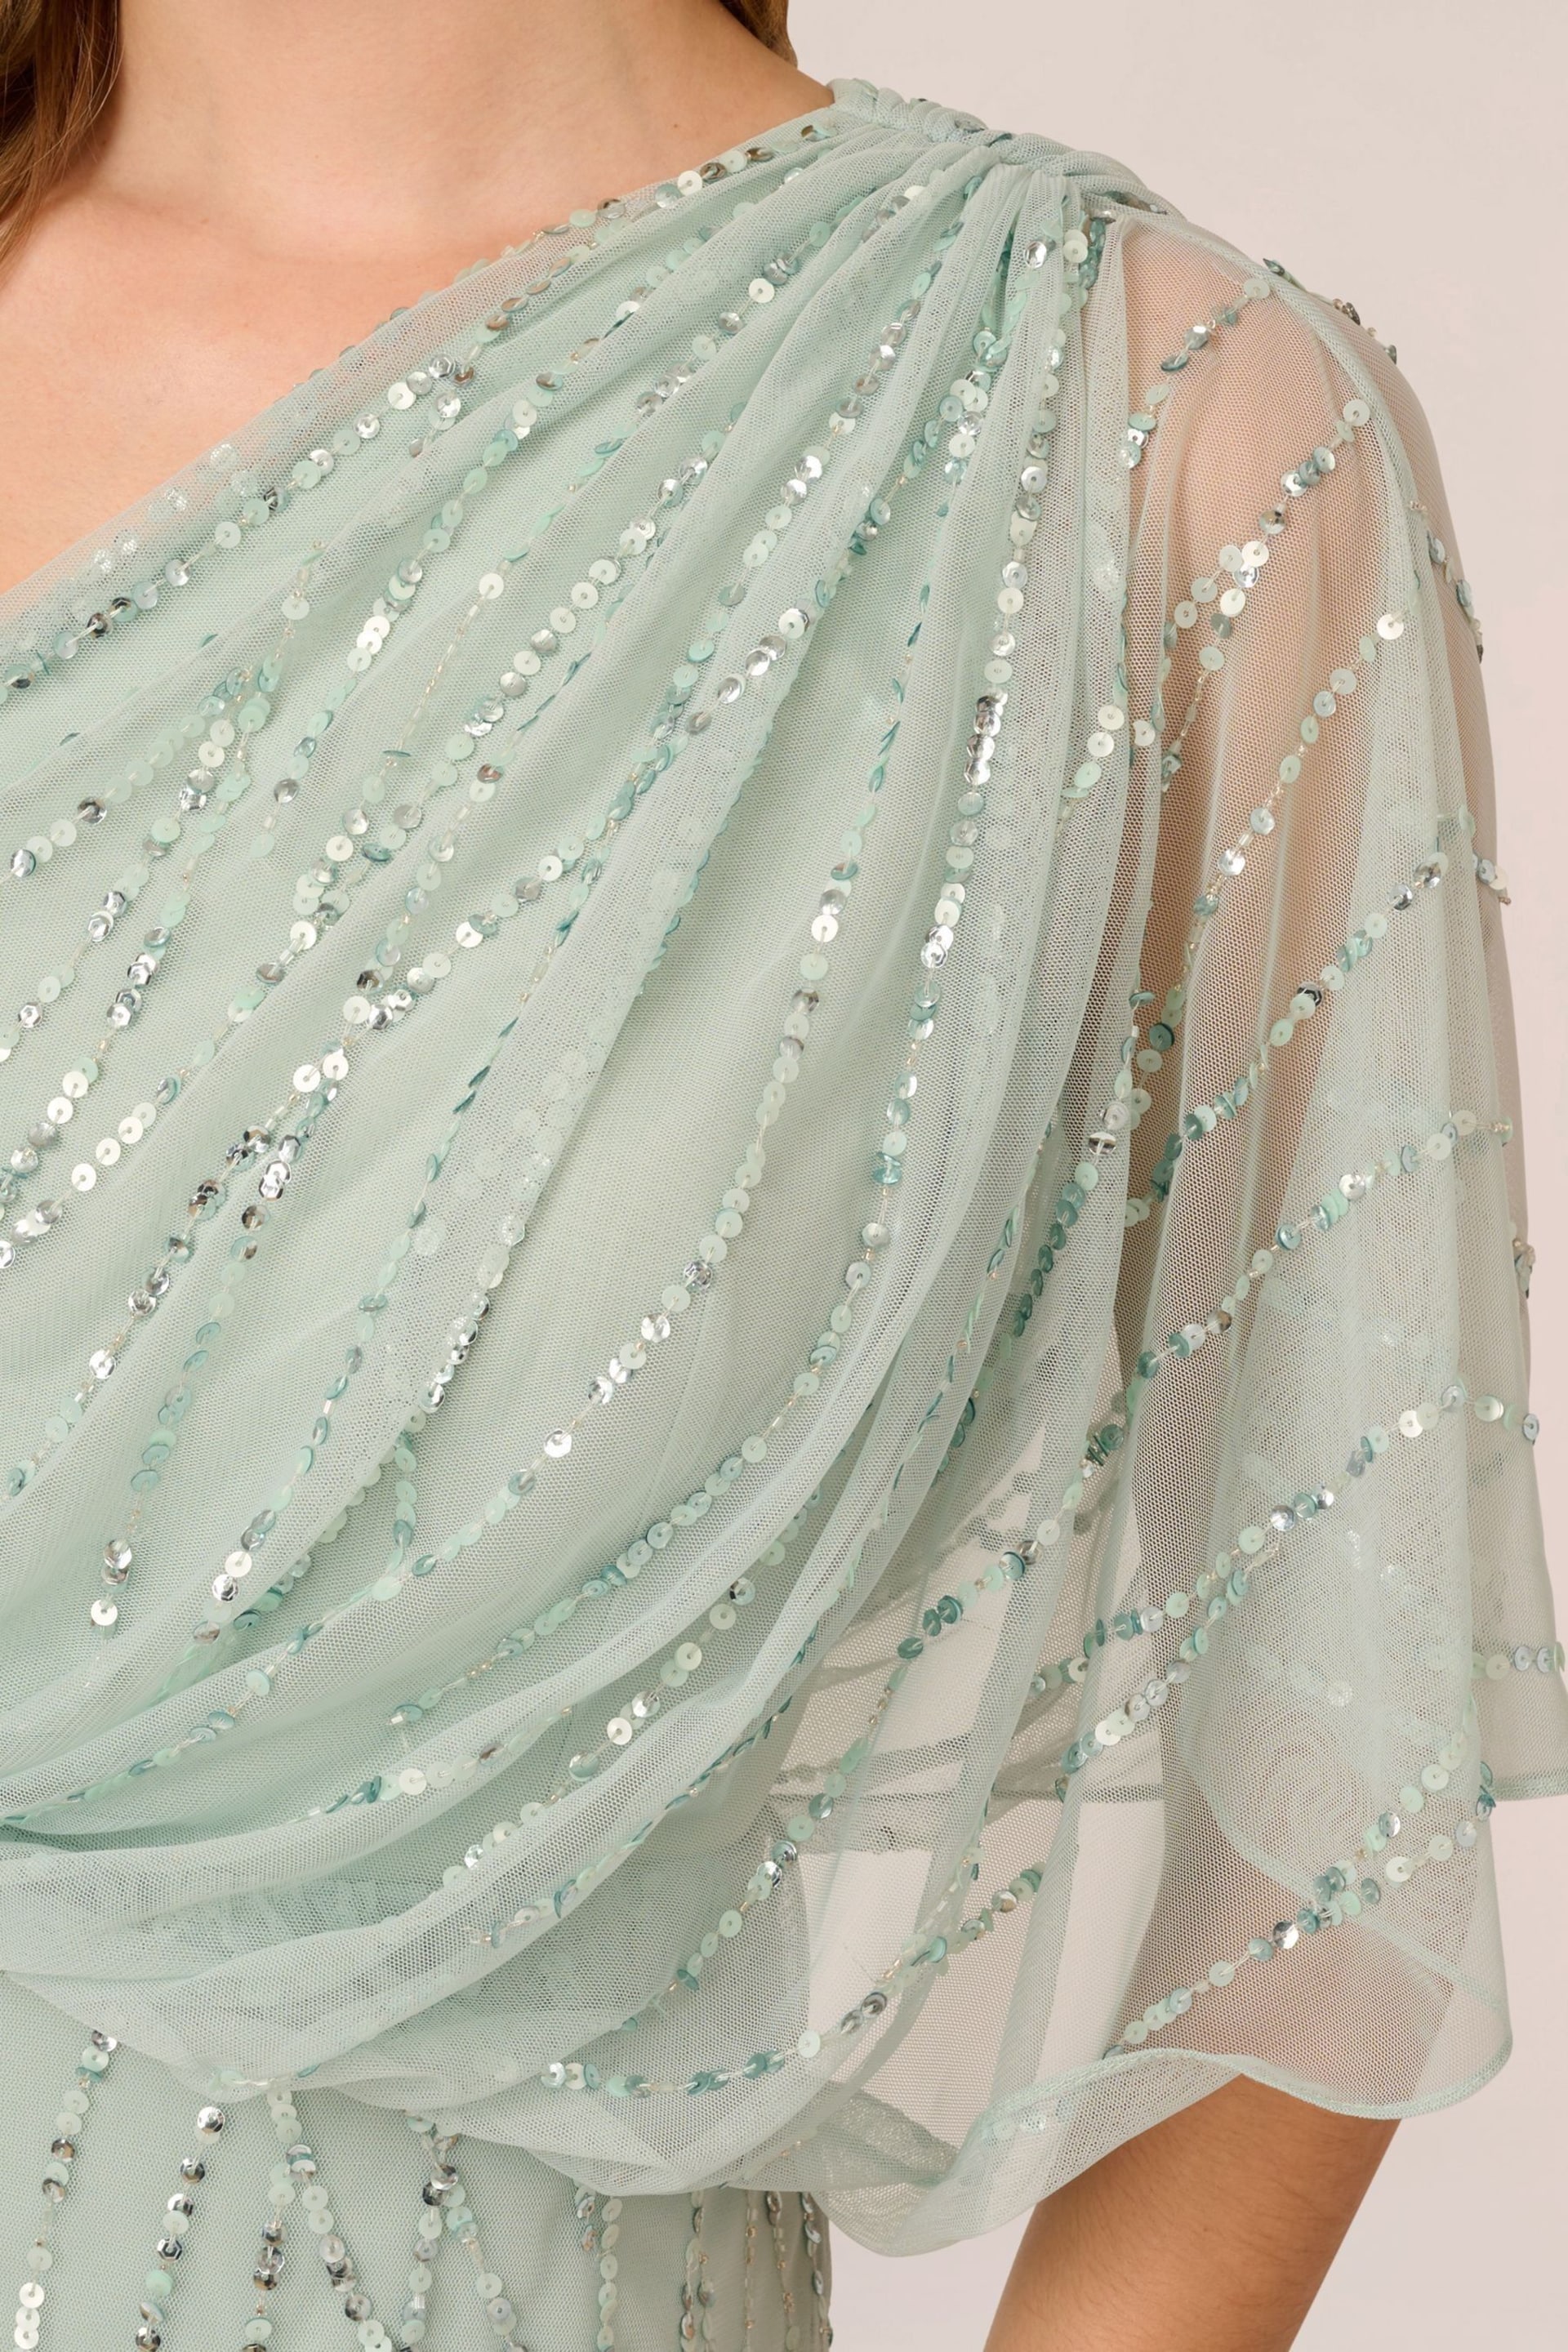 Adrianna Papell Green Long Beaded Dress - Image 5 of 7